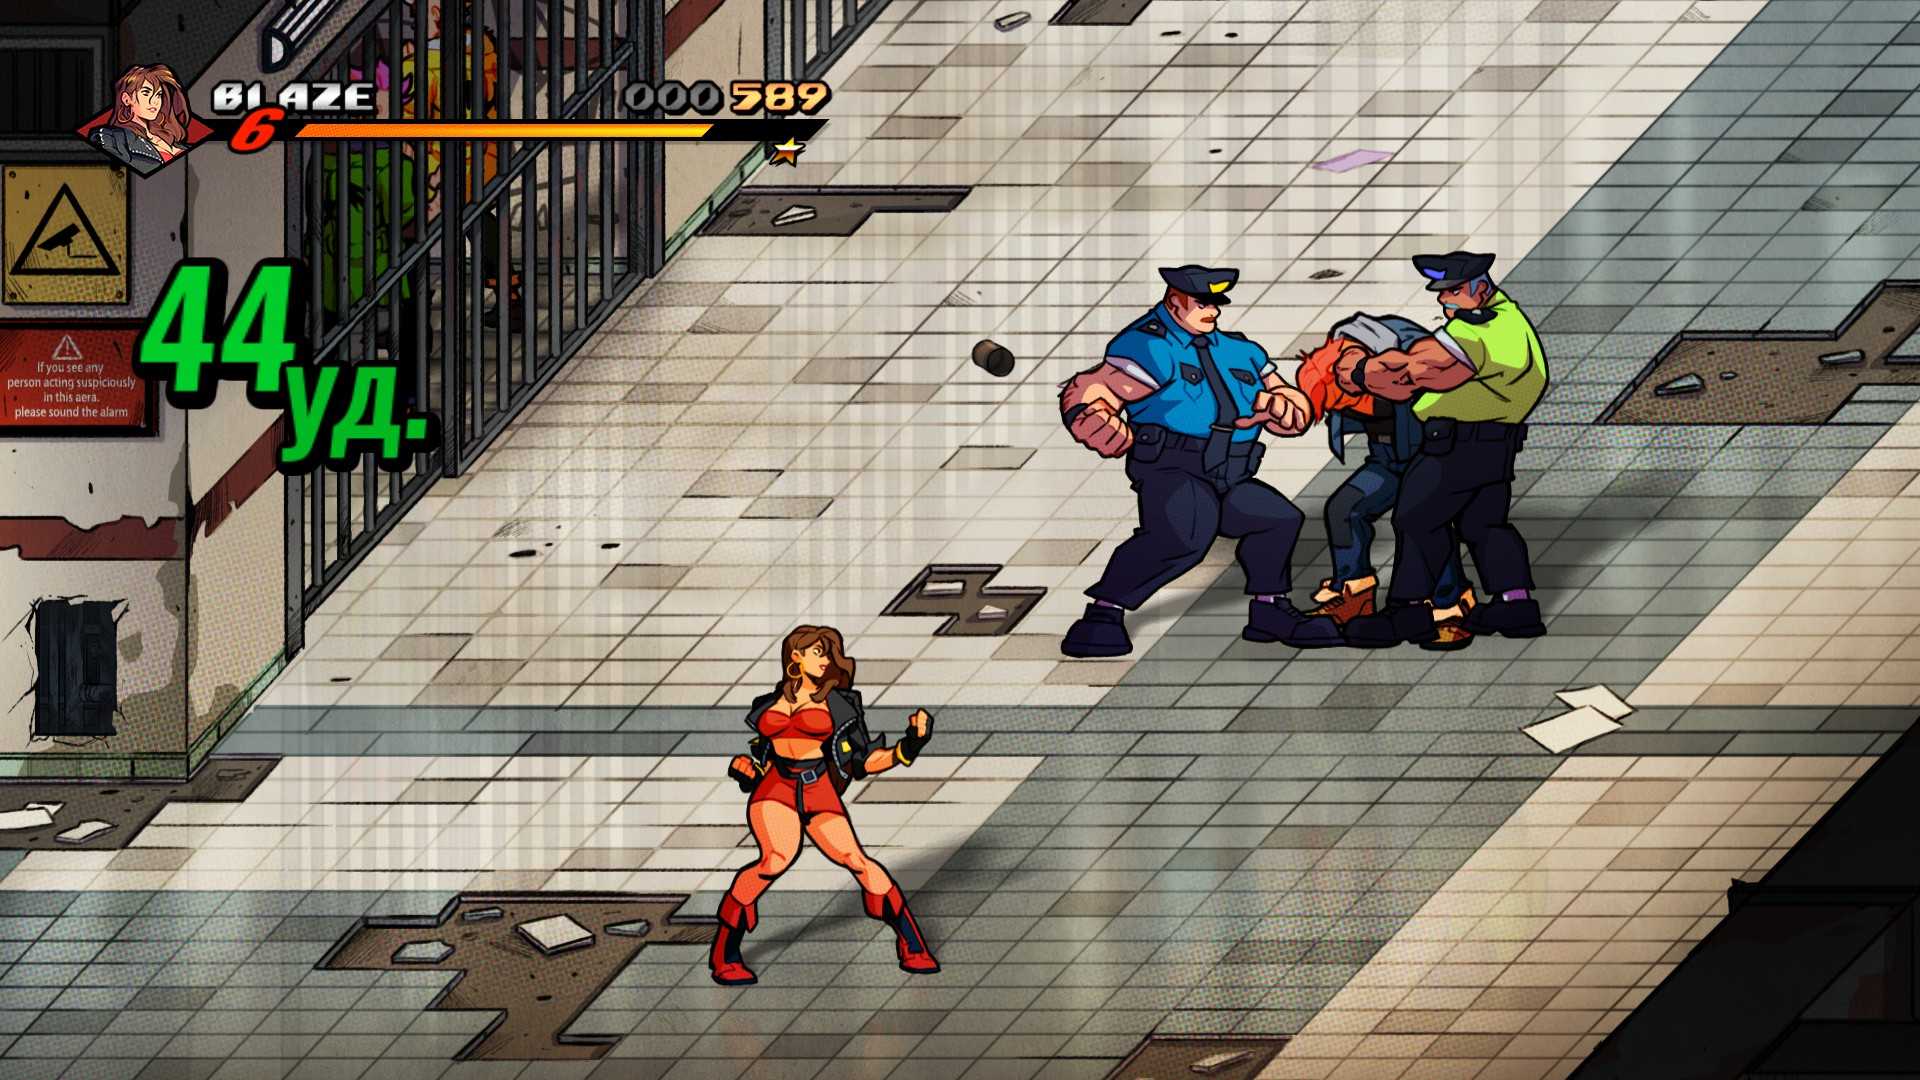 Streets of rage remake.